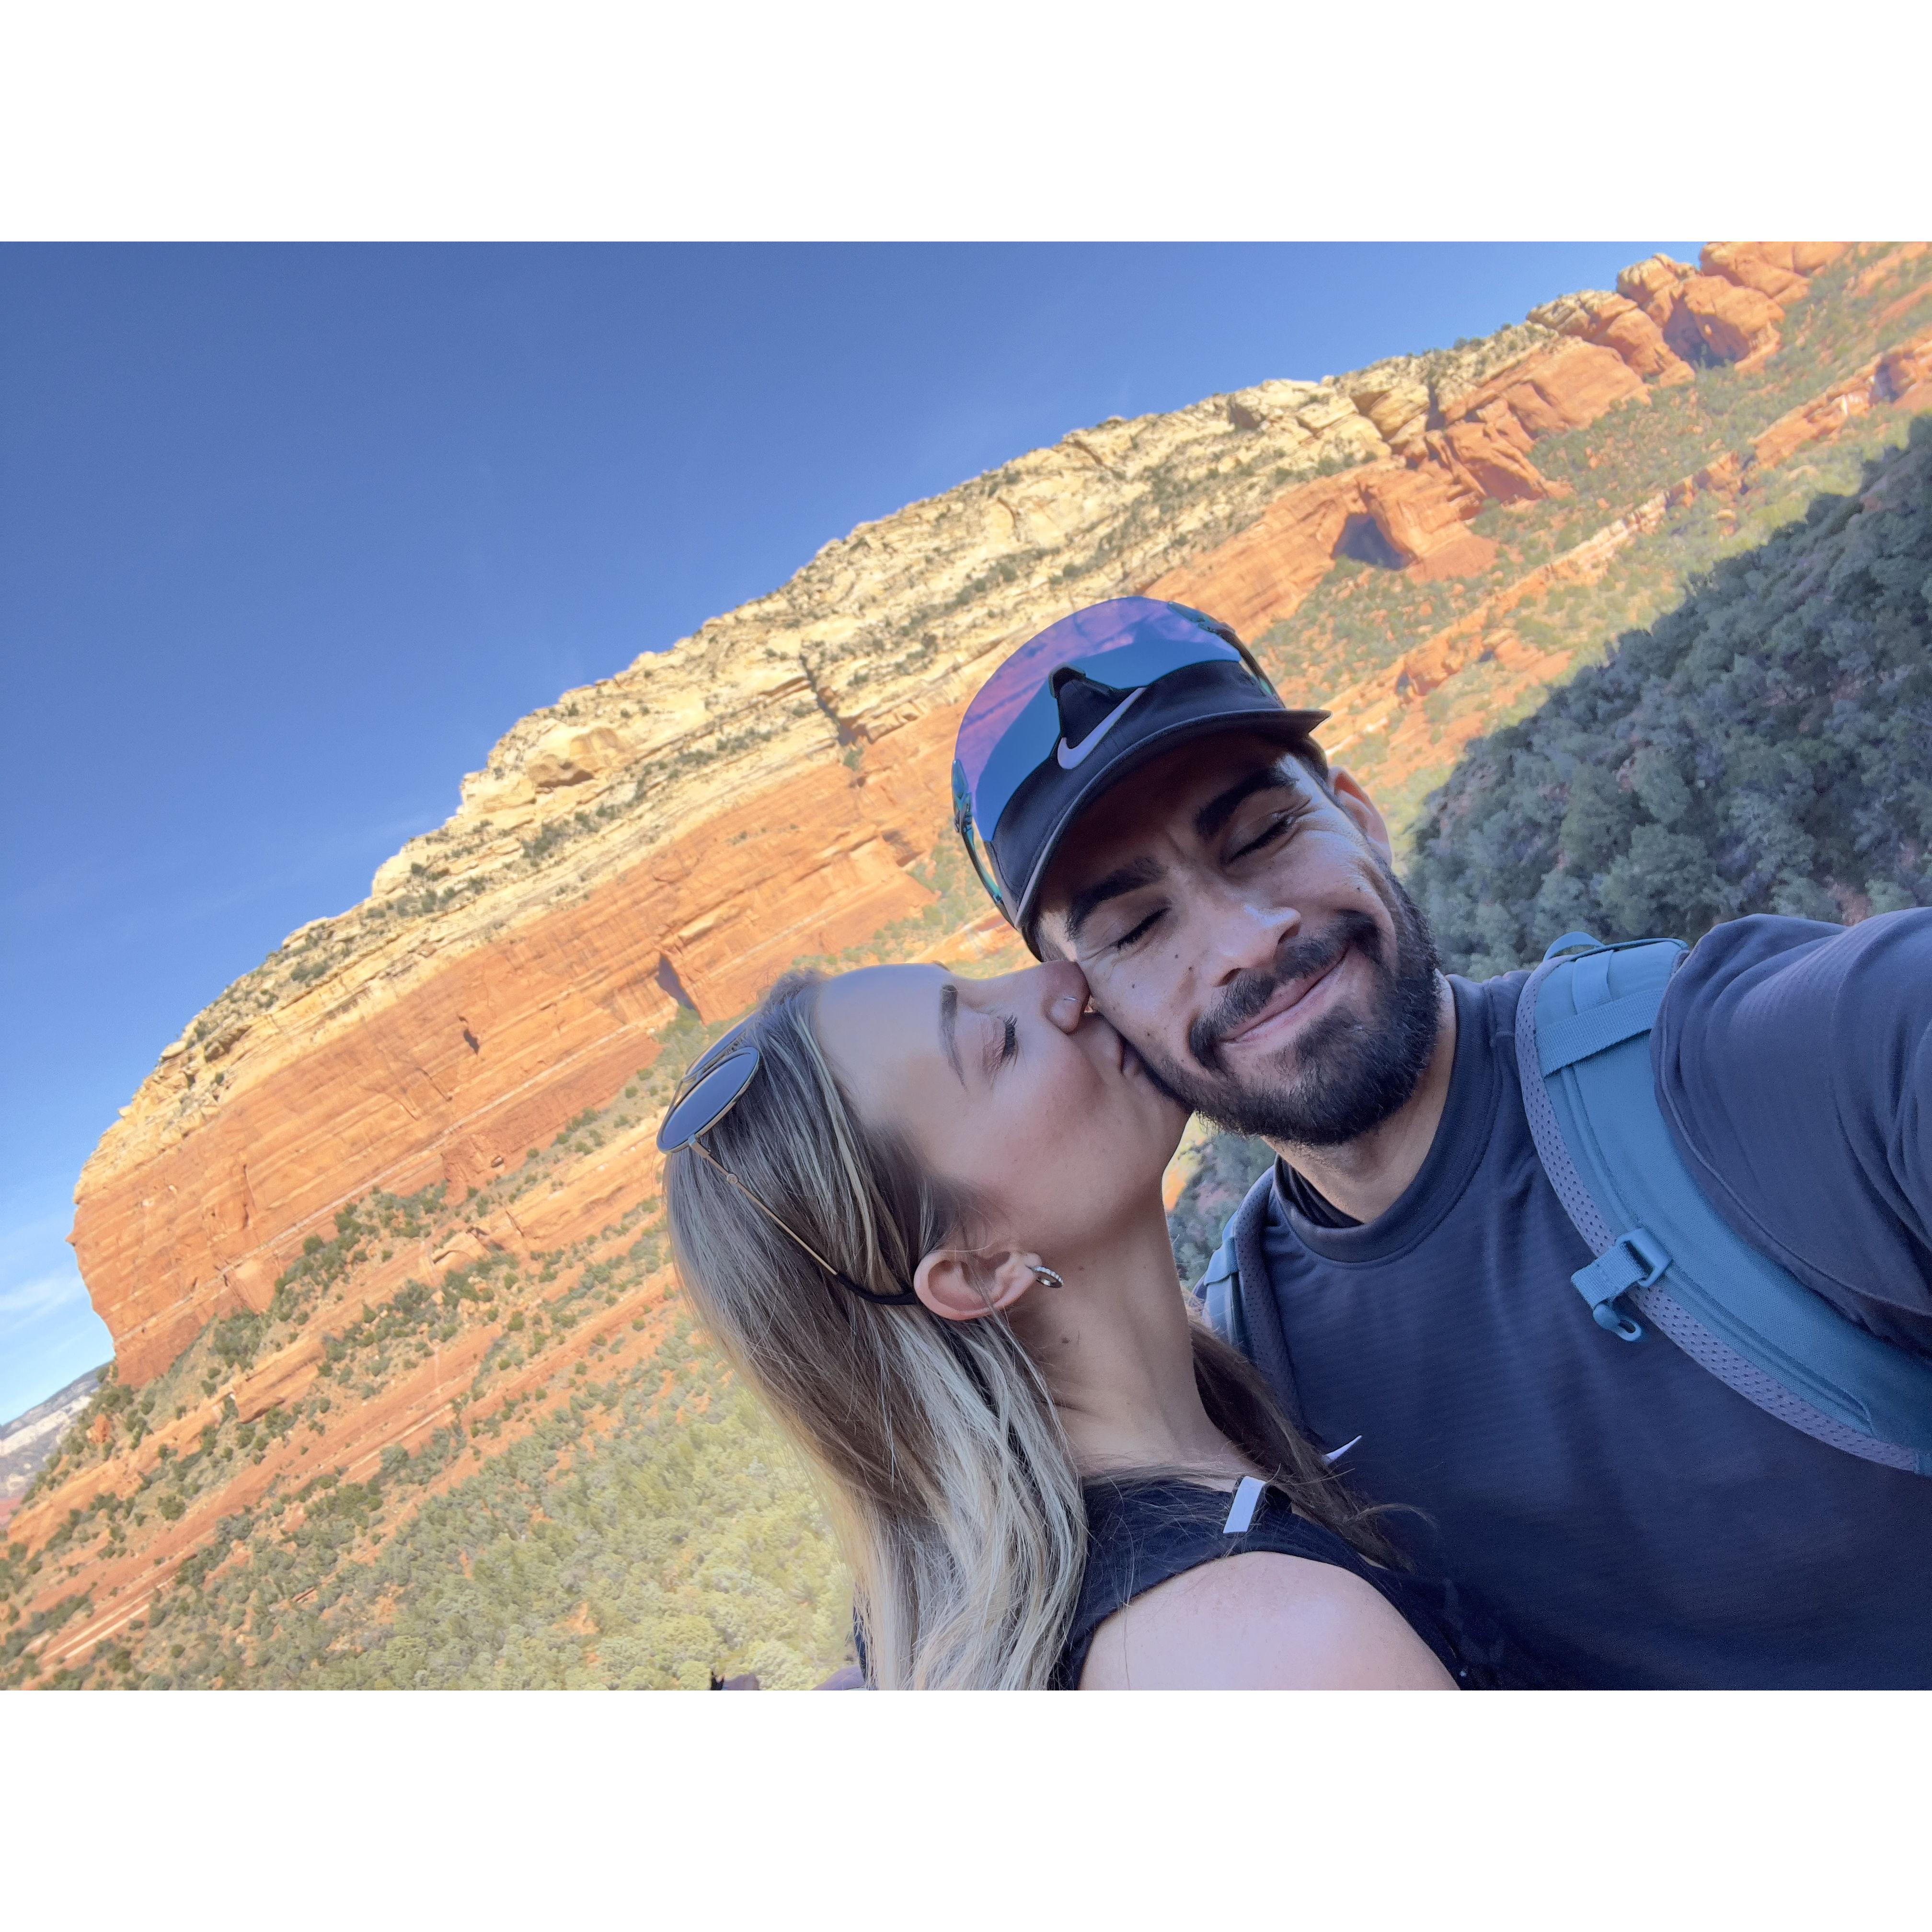 Our first trip out to Sedona <3